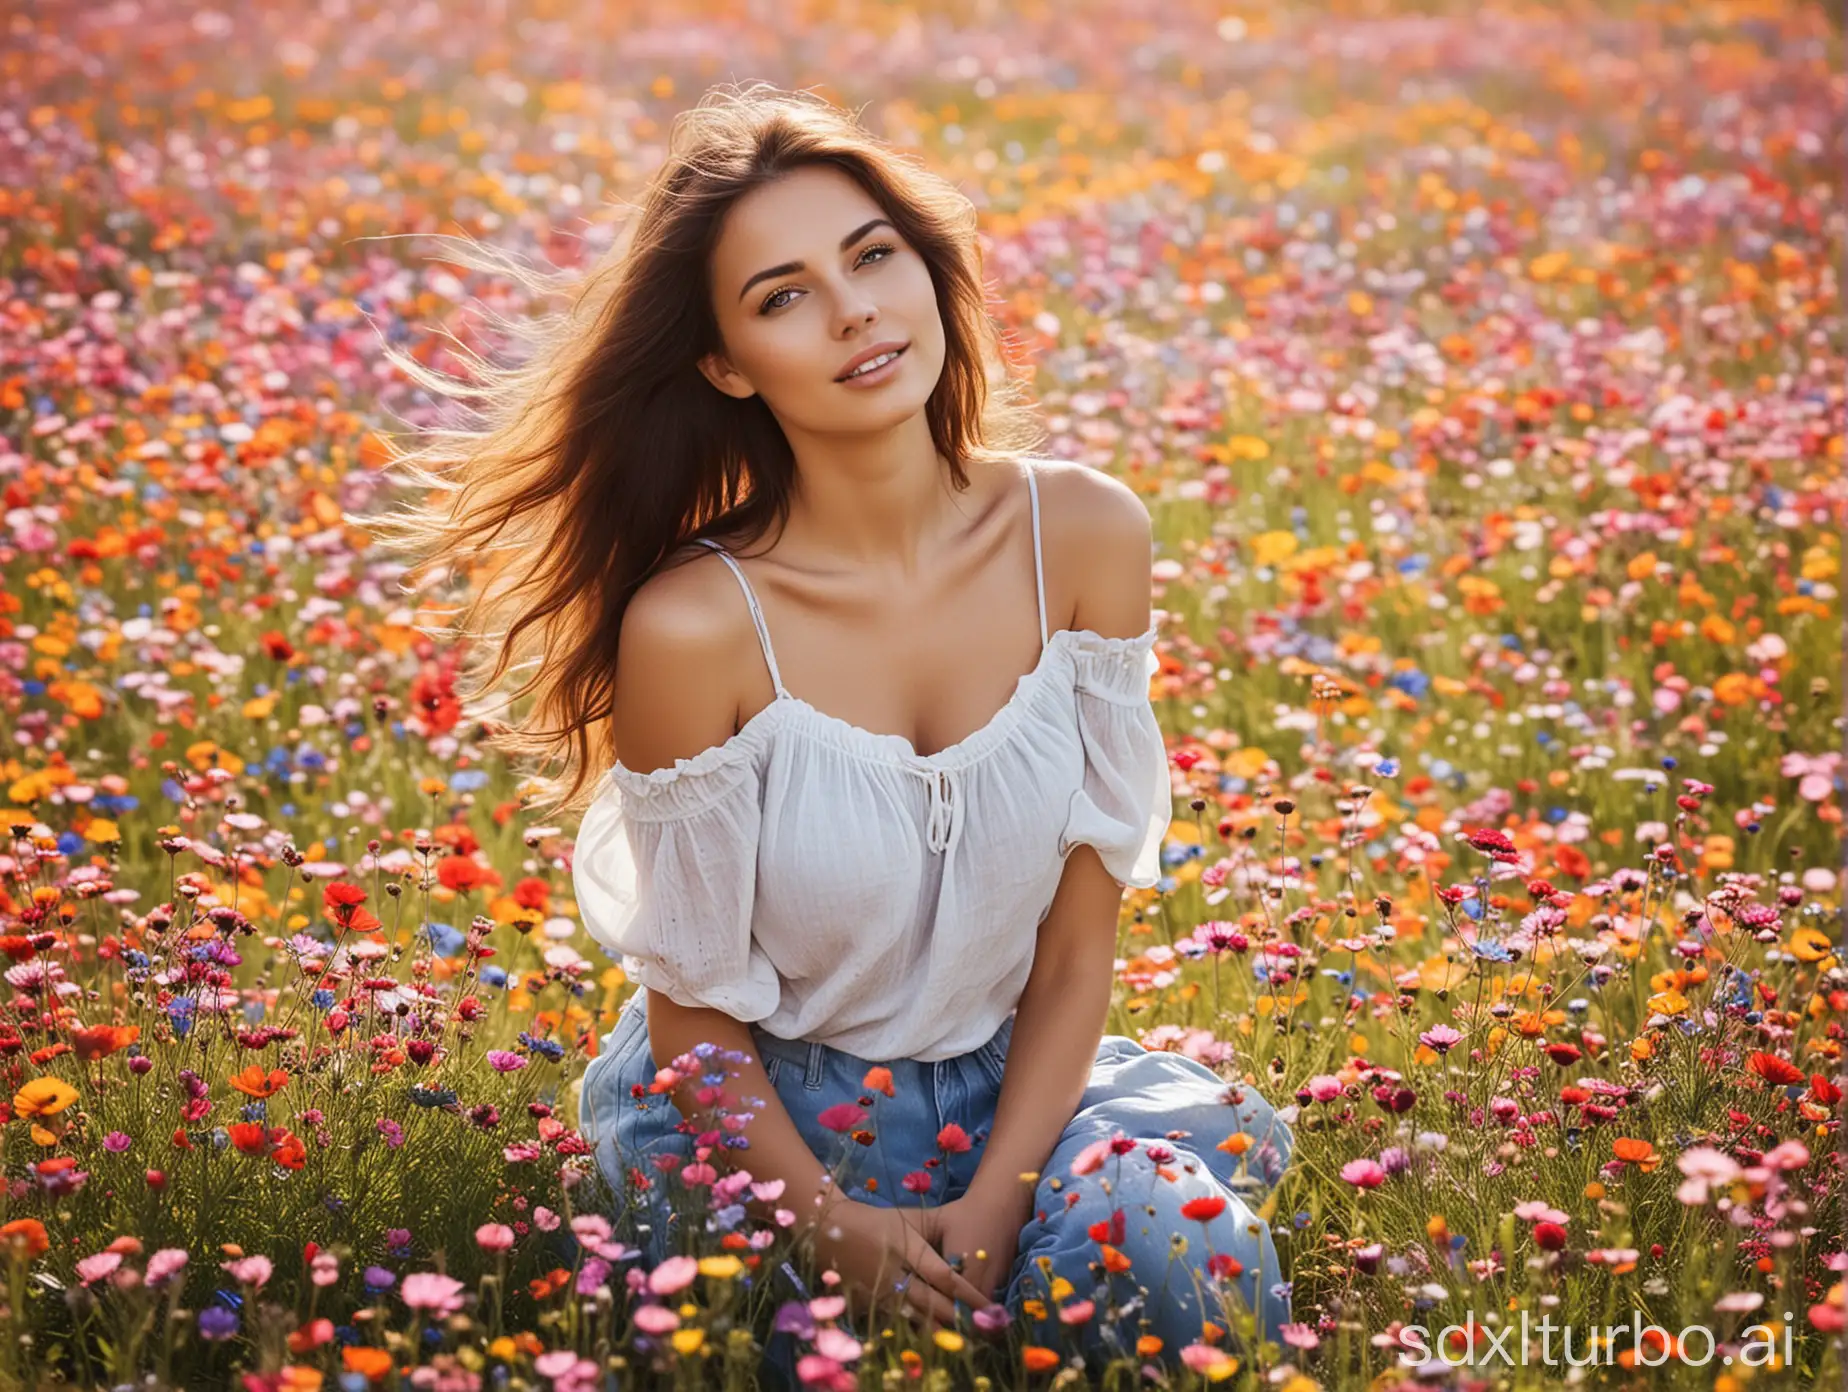 Beautiful woman on a colorful meadow